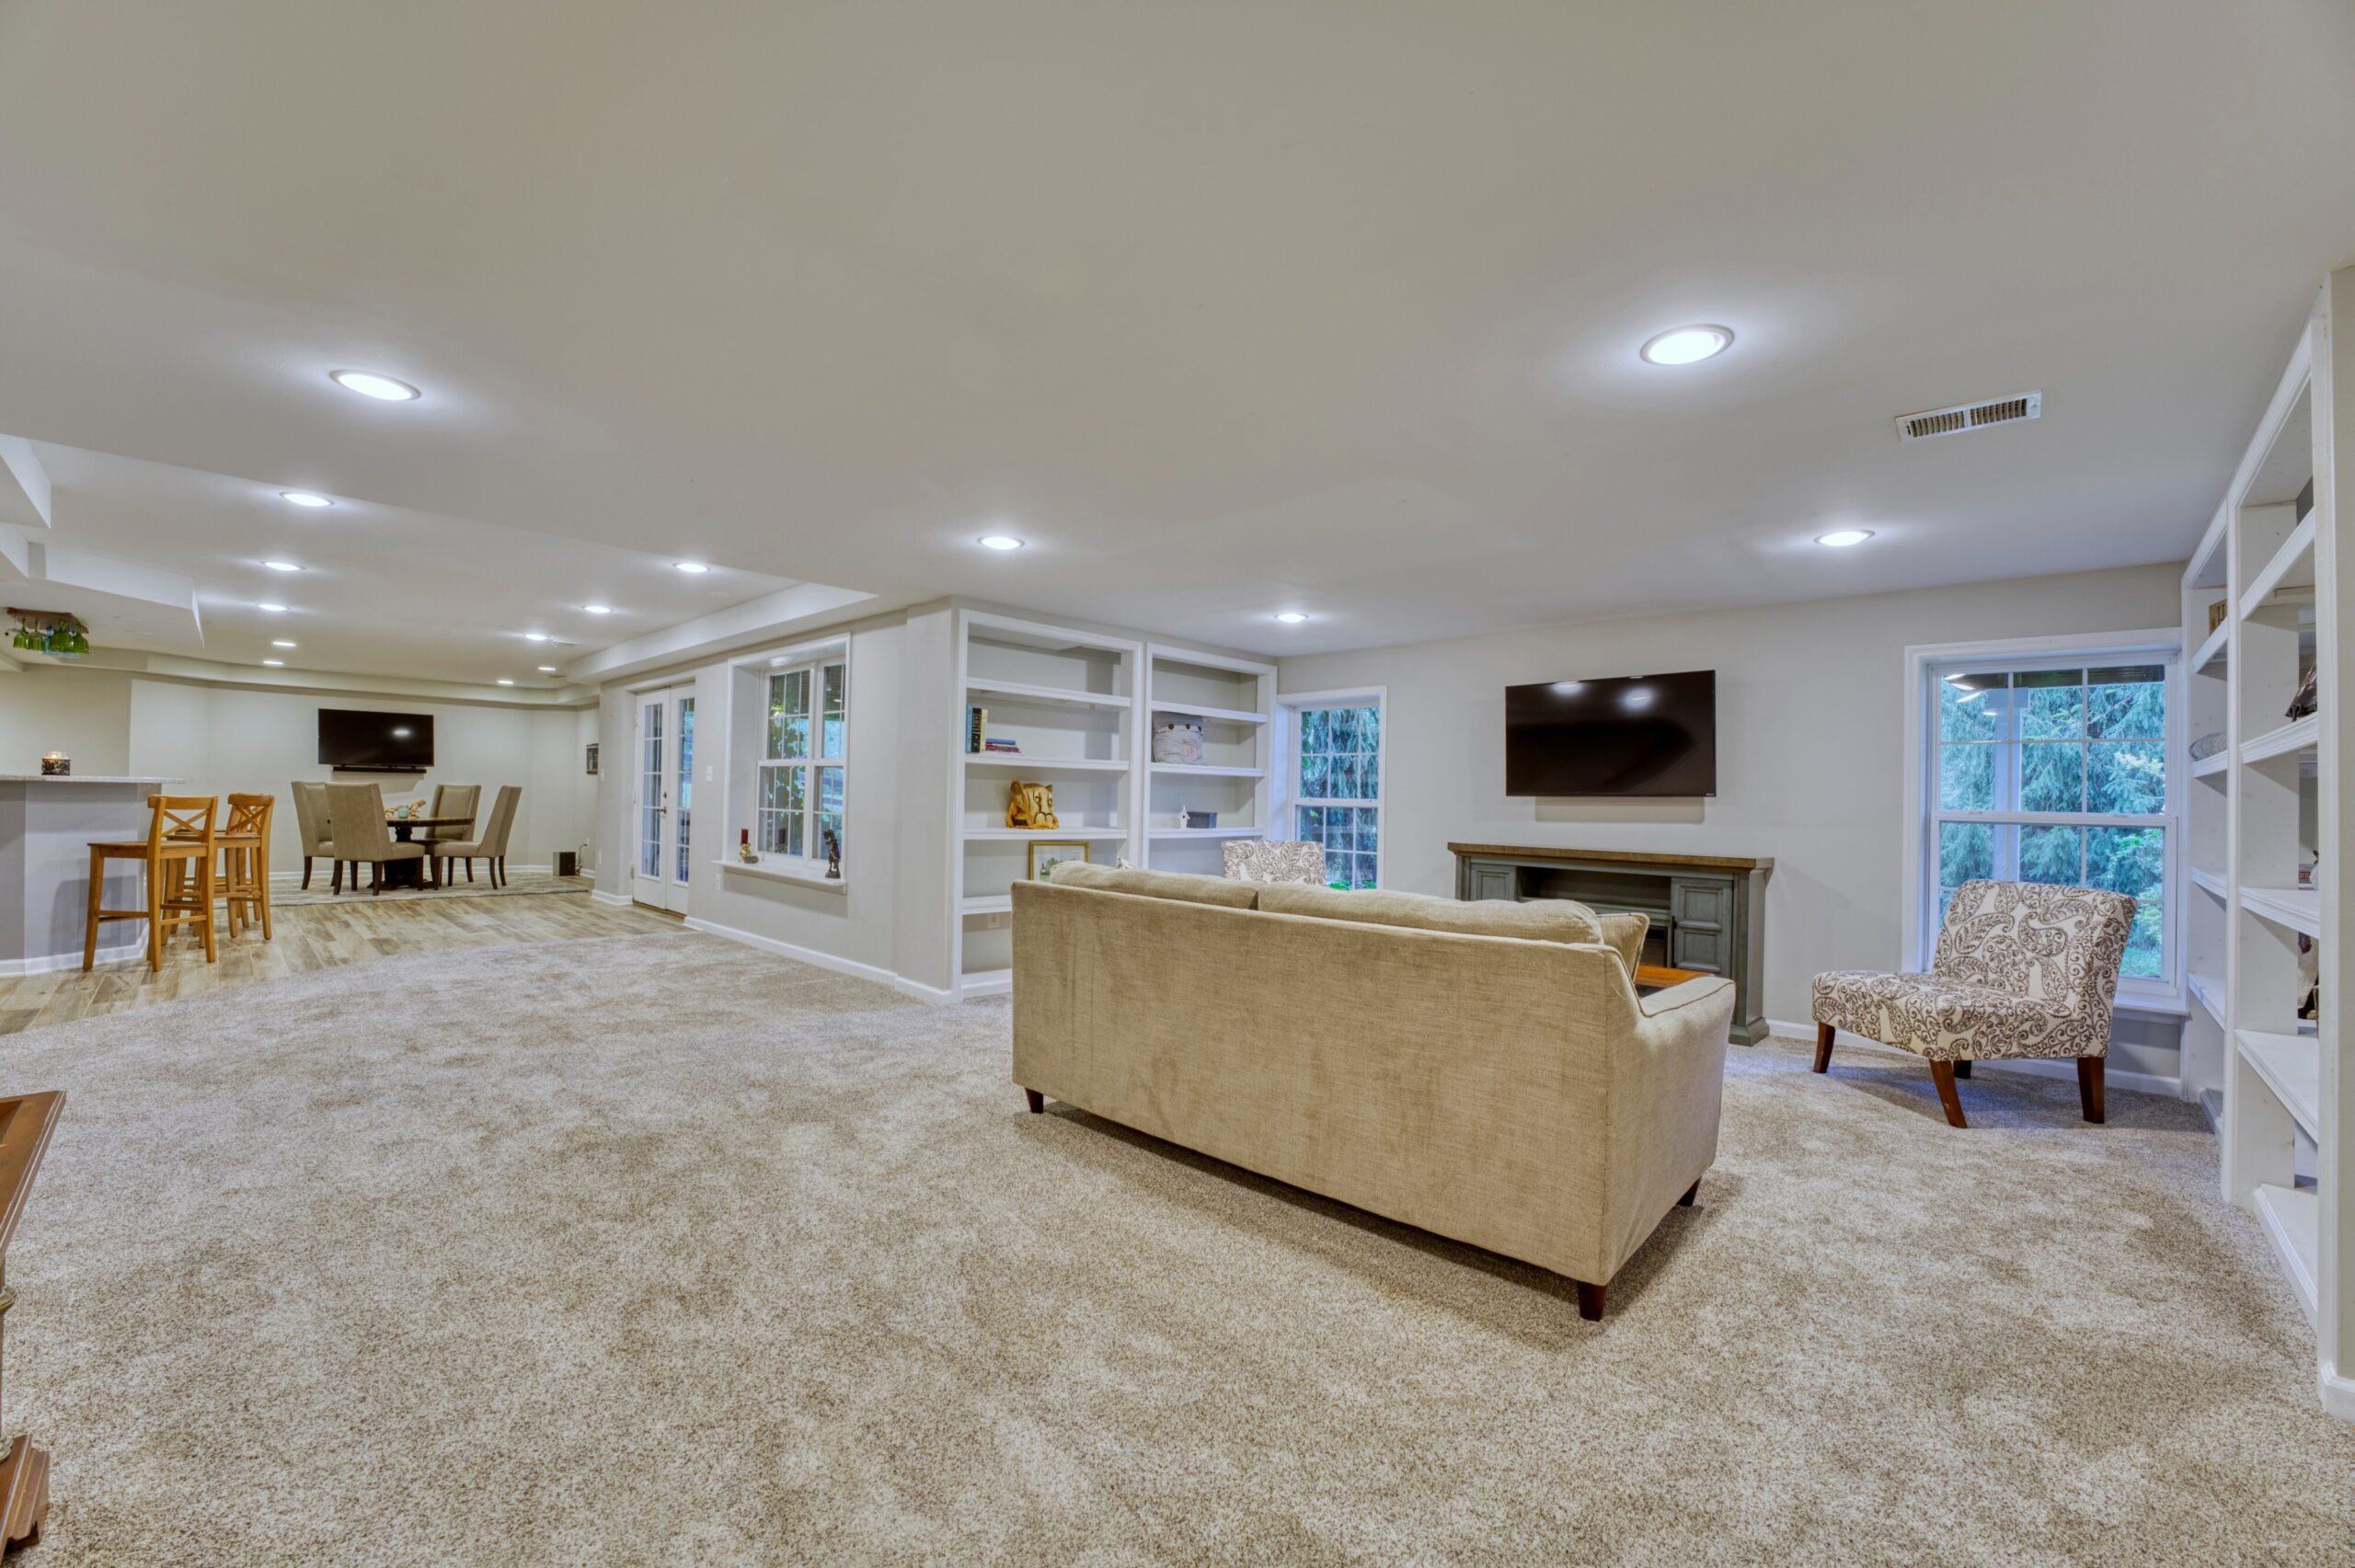 Professional interior photo of 16961 Heather Knolls Pl - showing the finished basement with living area with built in shelves, and sitting area and bar in the background